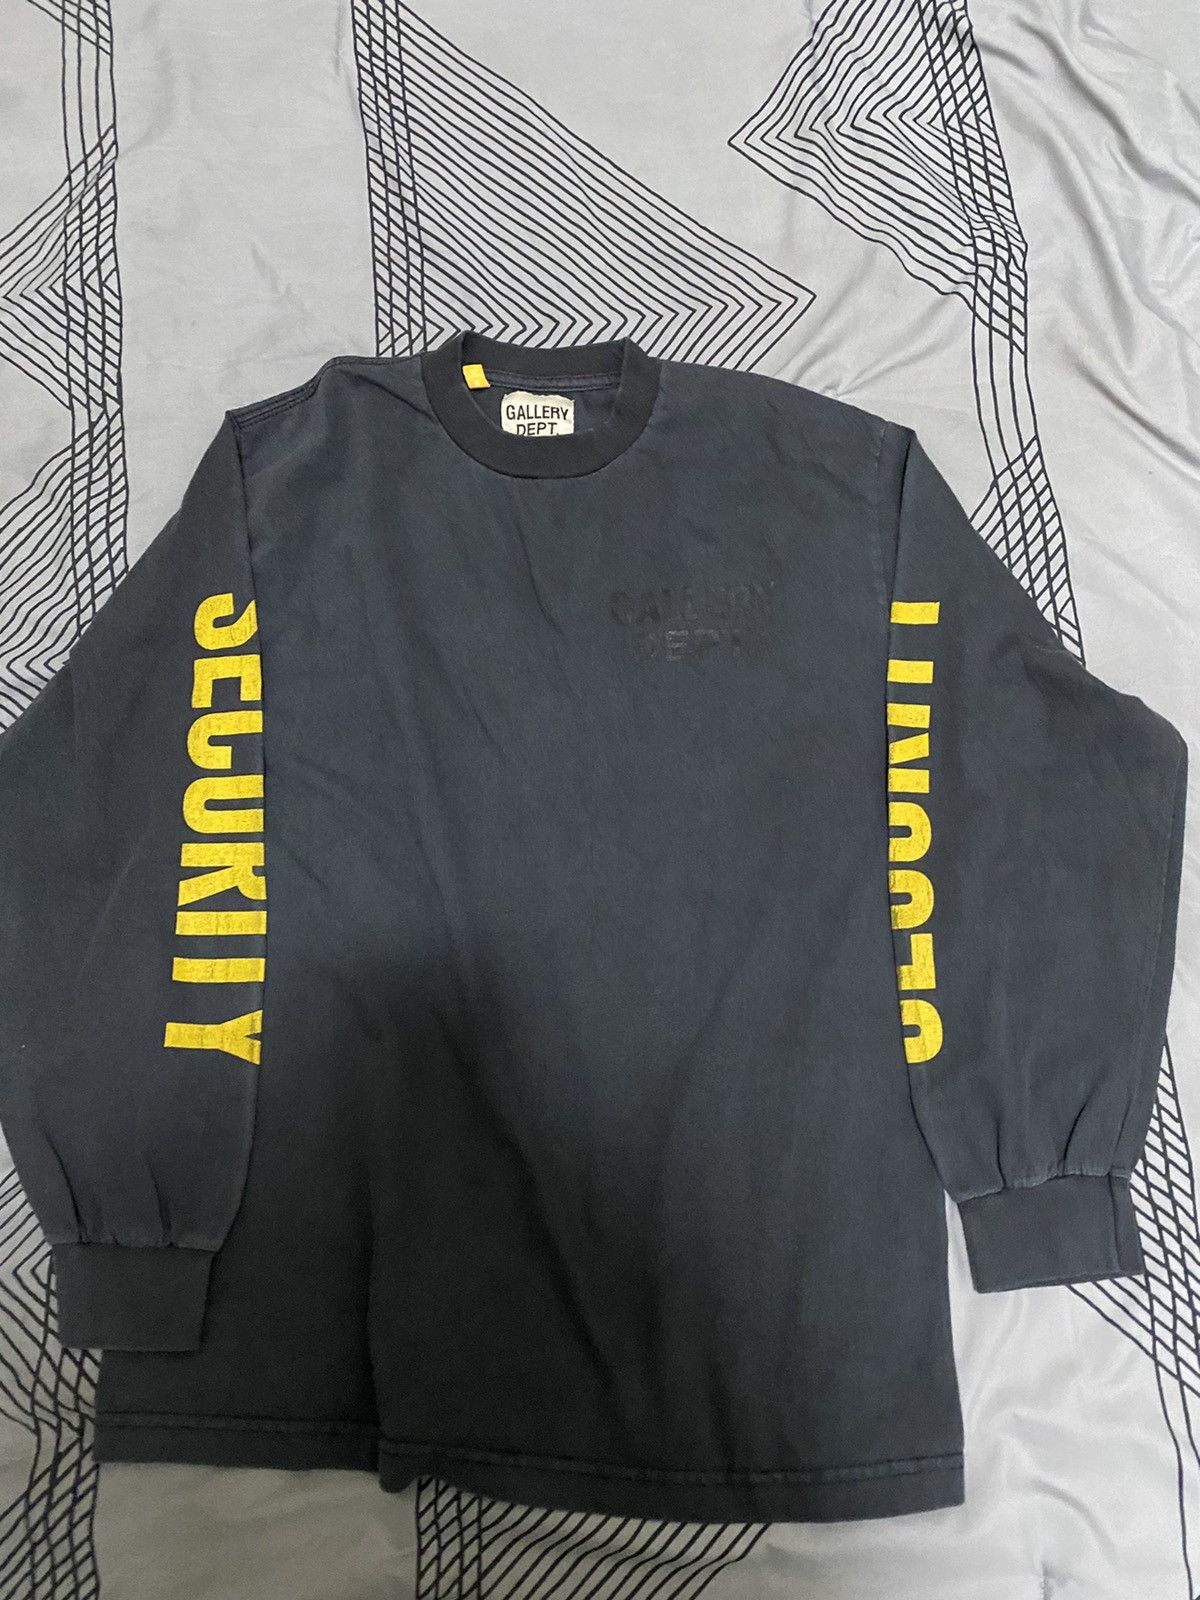 Gallery Dept. Security L/S | Grailed